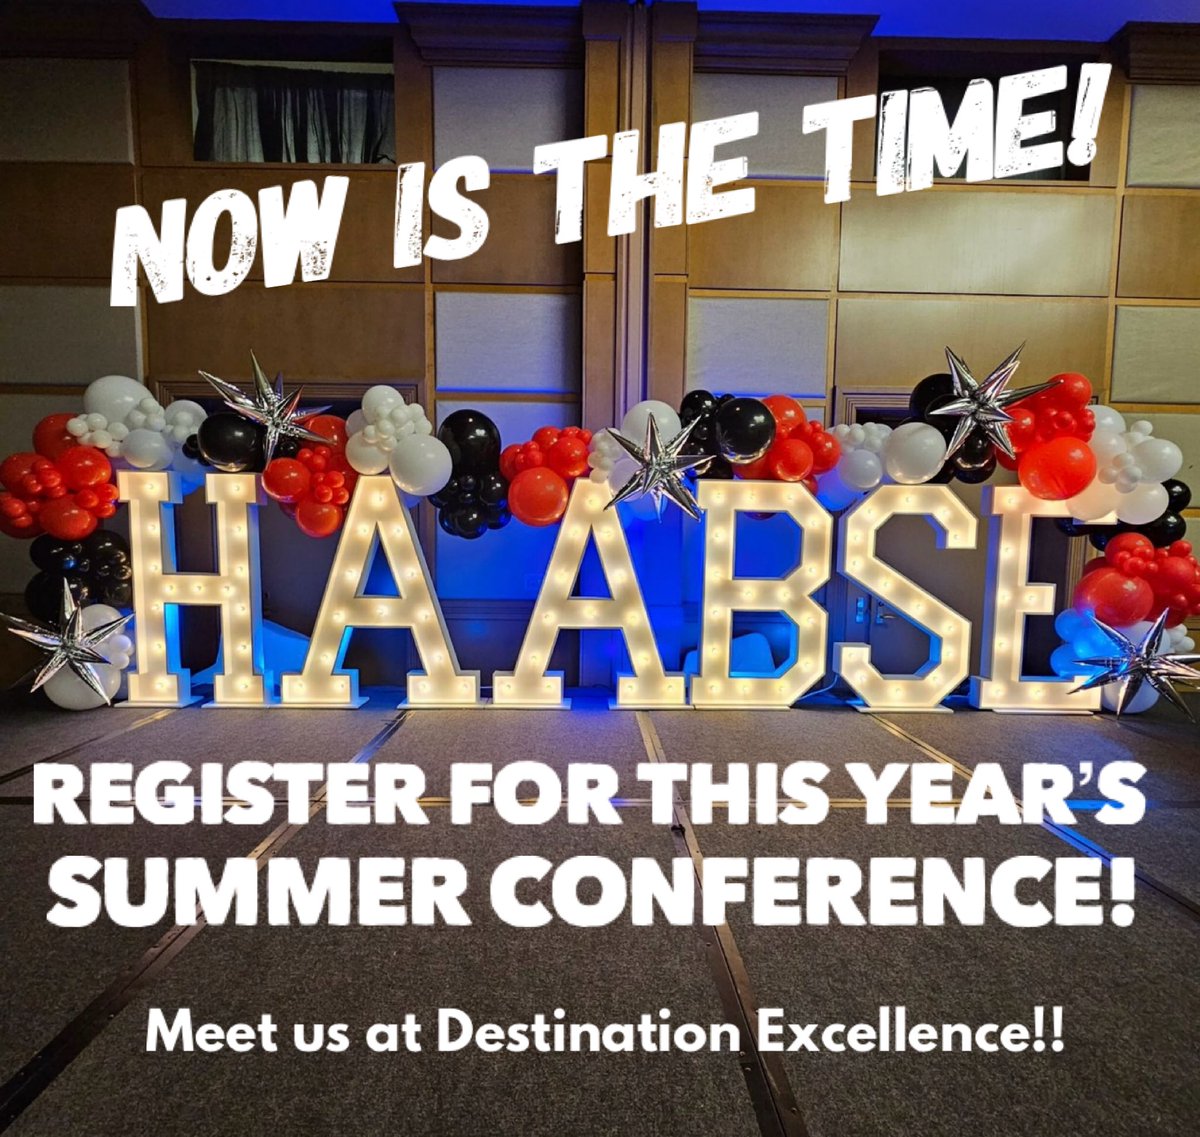 Get ready to travel to Destination Excellence! Register now for this year’s conference!! #HAABSEconnect bit.ly/HAABSEConnect24